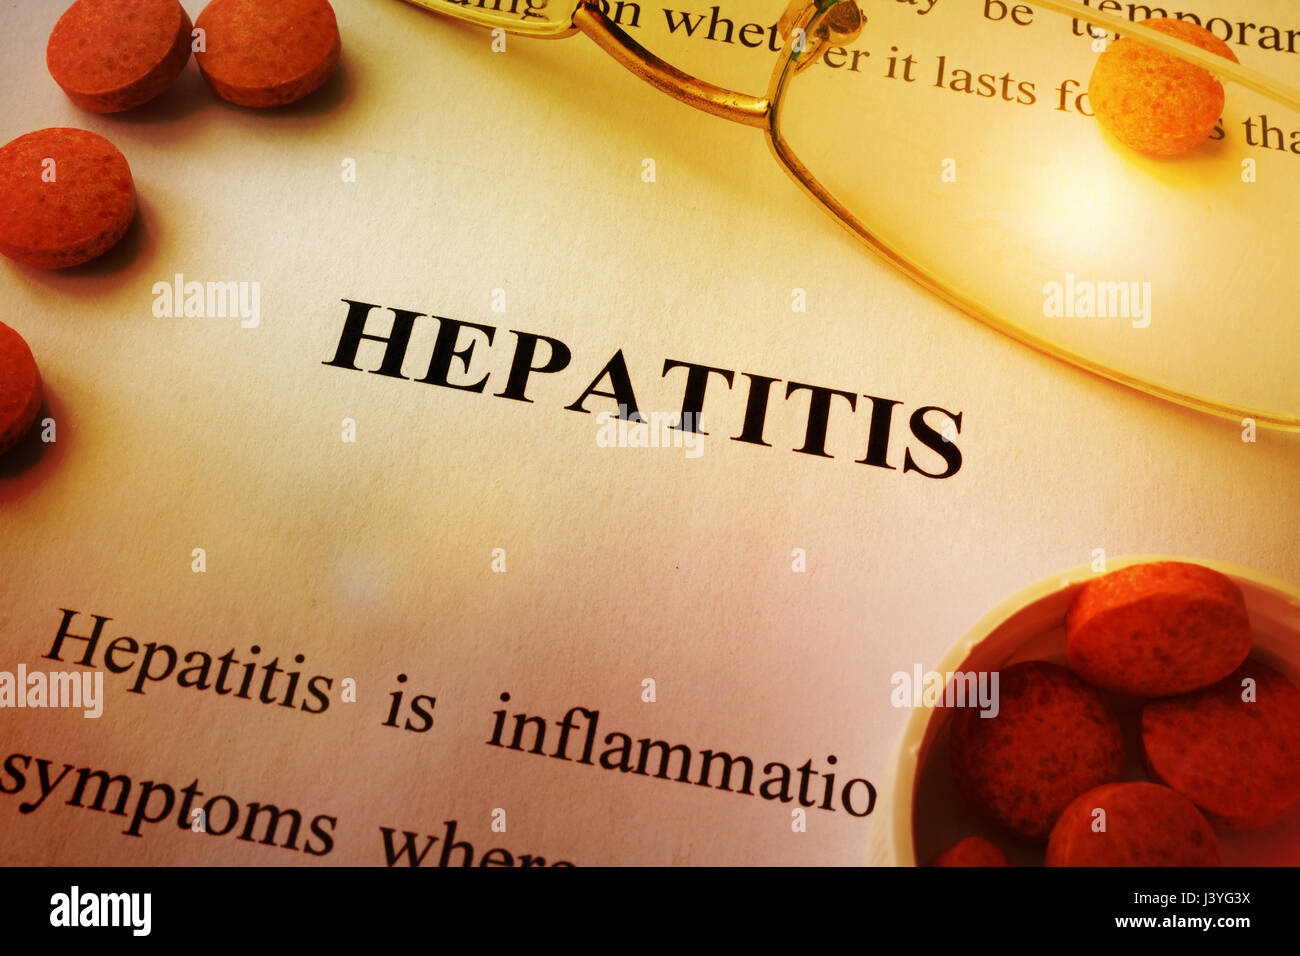 Page of book with title Hepatitis and tablets. Stock Photo